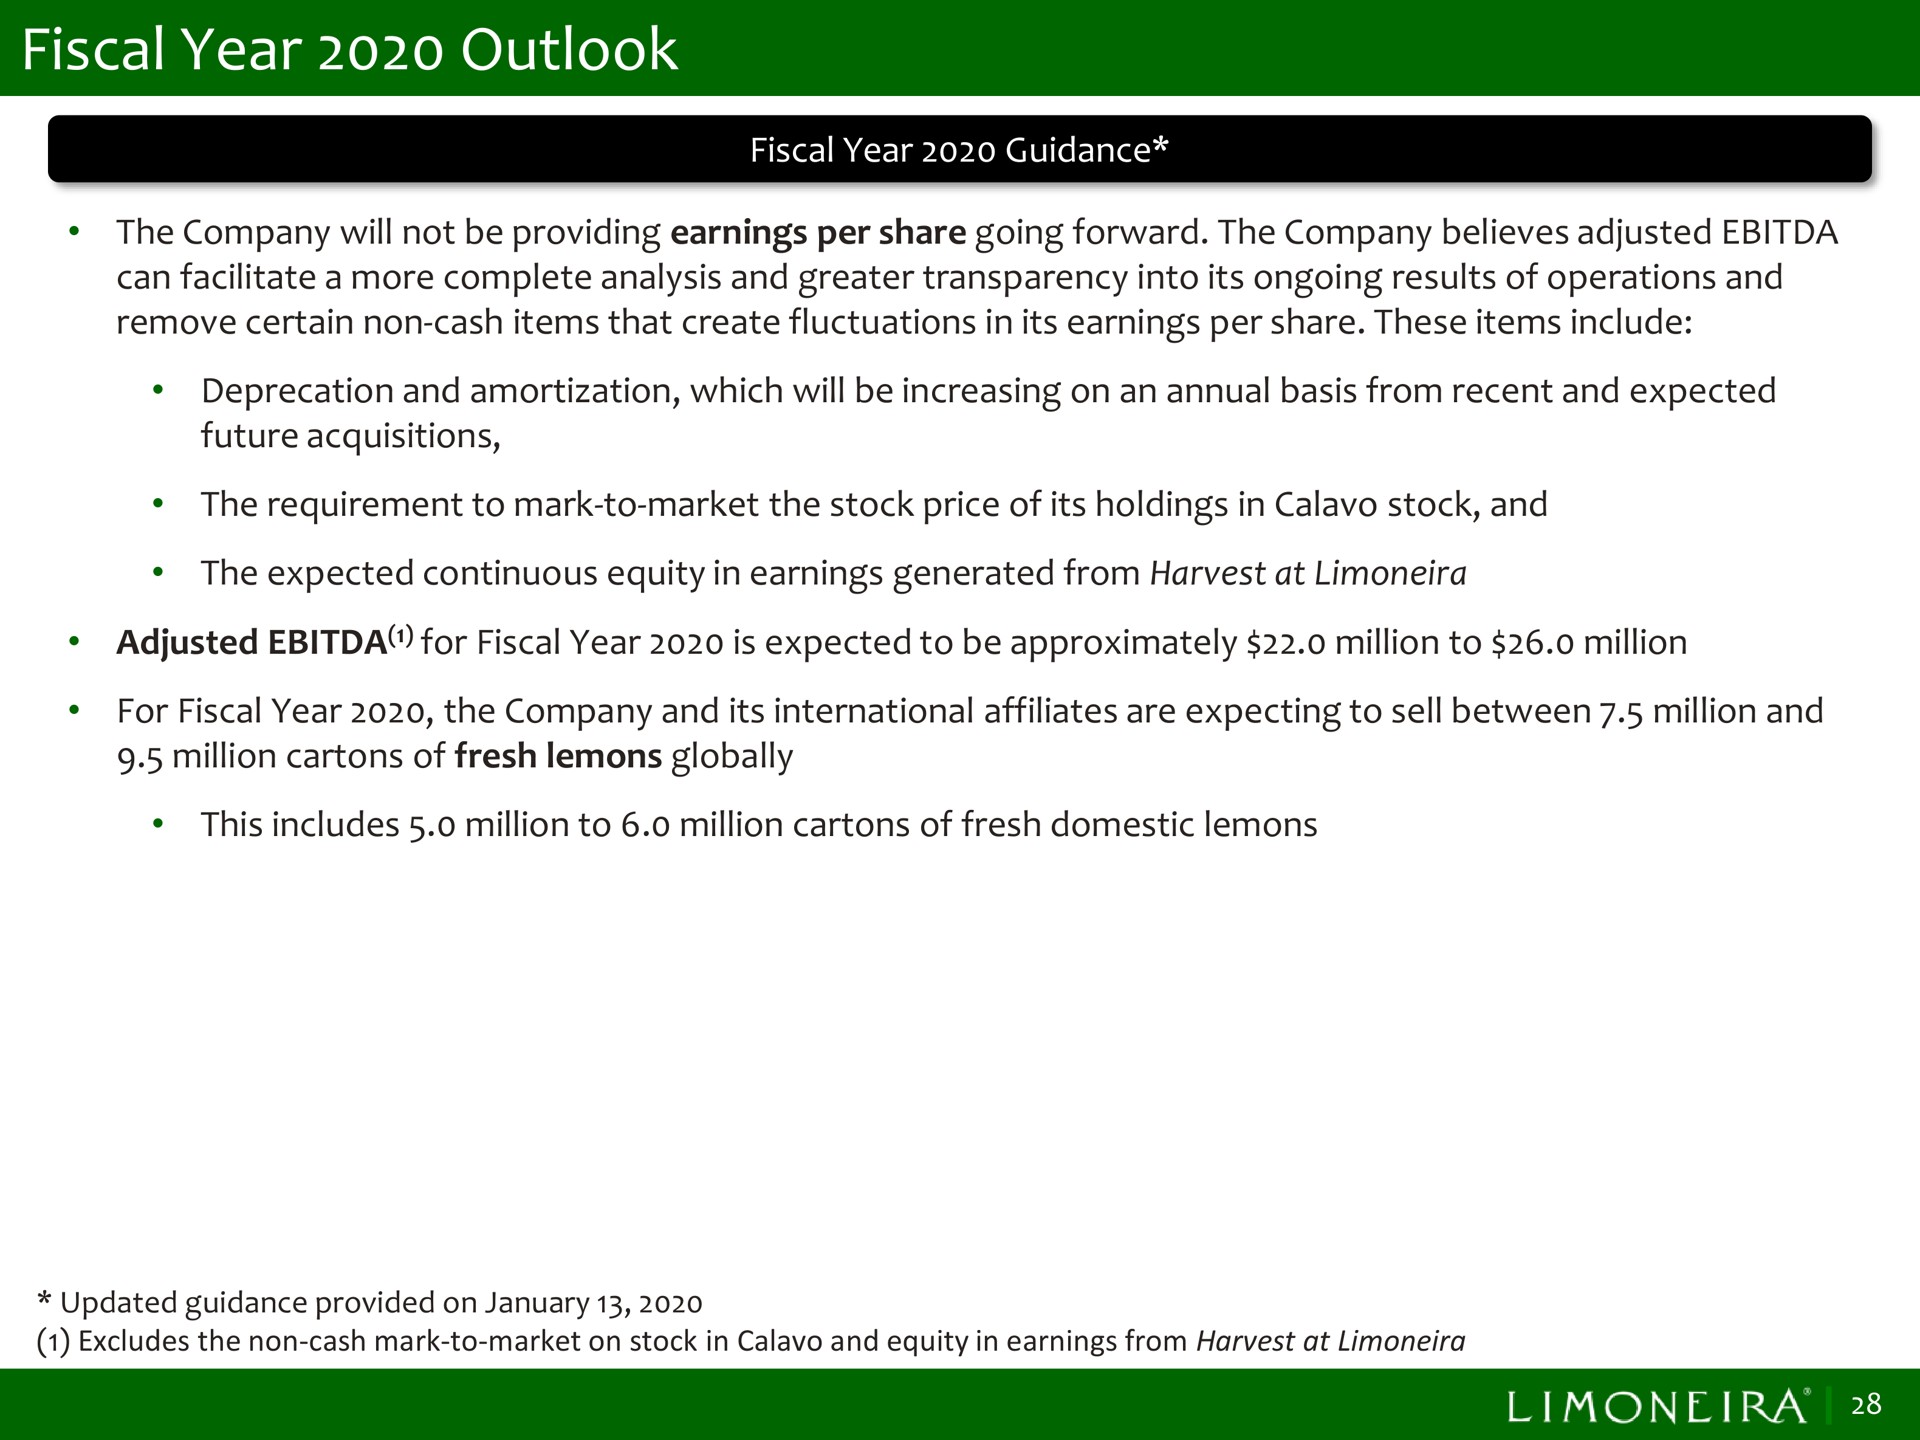 fiscal year outlook | Limoneira